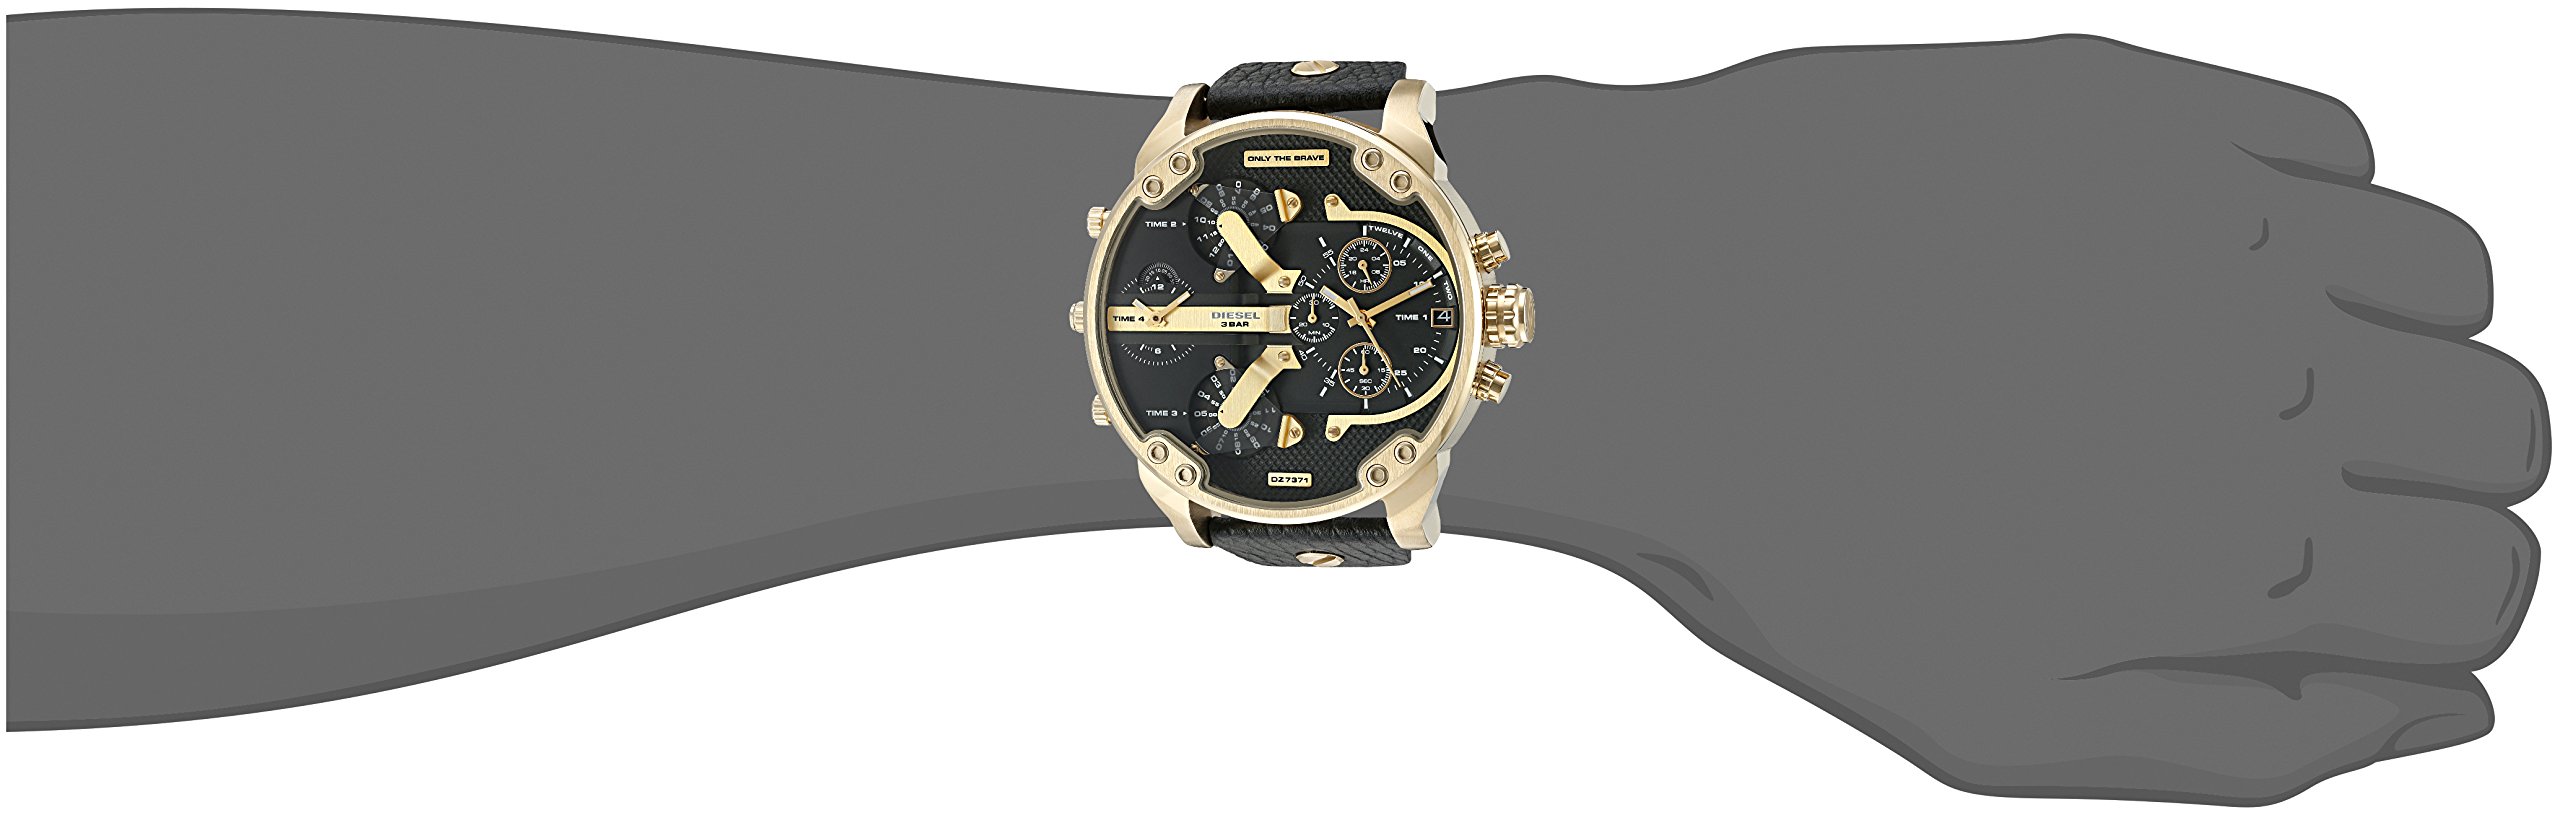 Diesel Men's 57mm Mr. Daddy 2.0 Quartz Stainless Steel and Leather Chronograph Watch, Color: Gold, Black (Model: DZ7371)